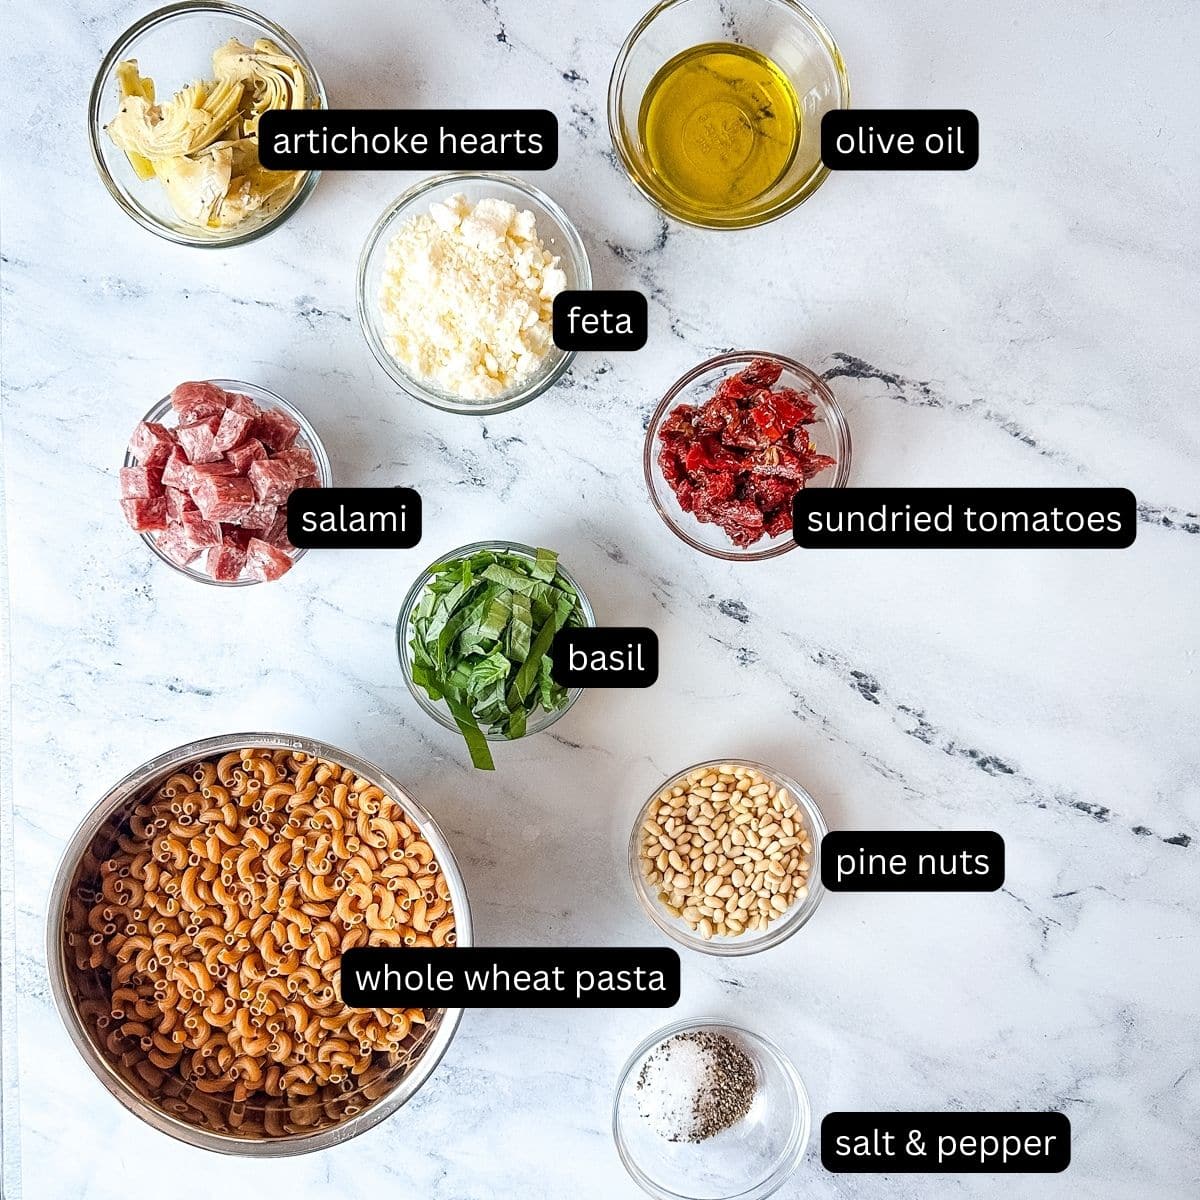 Labeled ingredients for whole wheat pasta salad on a white marble counter.